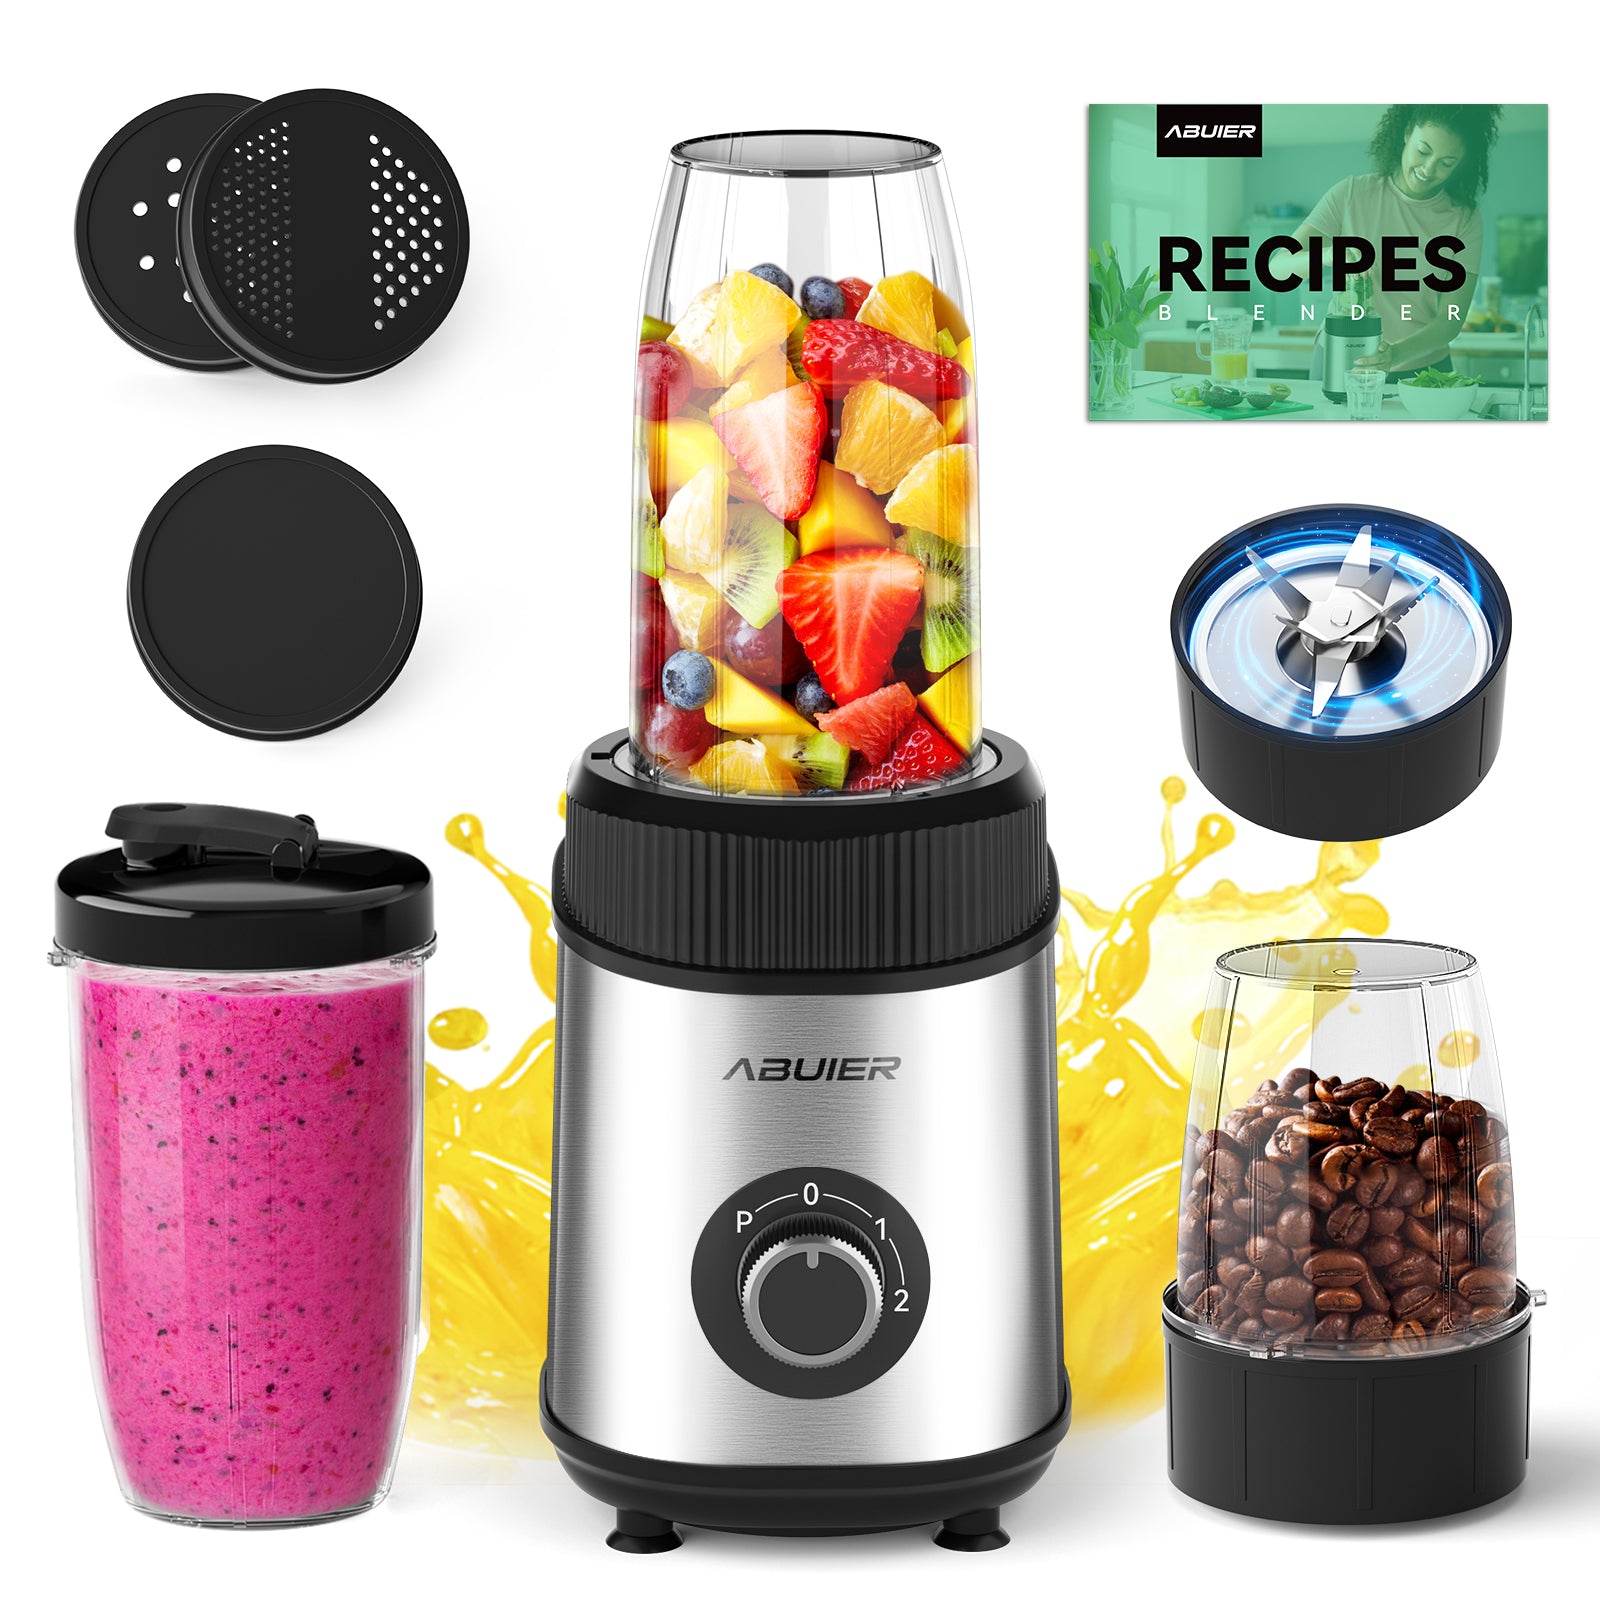 Abuler BL311B Powerful 900W Blender for Shakes and Smoothies with To-Go Cups